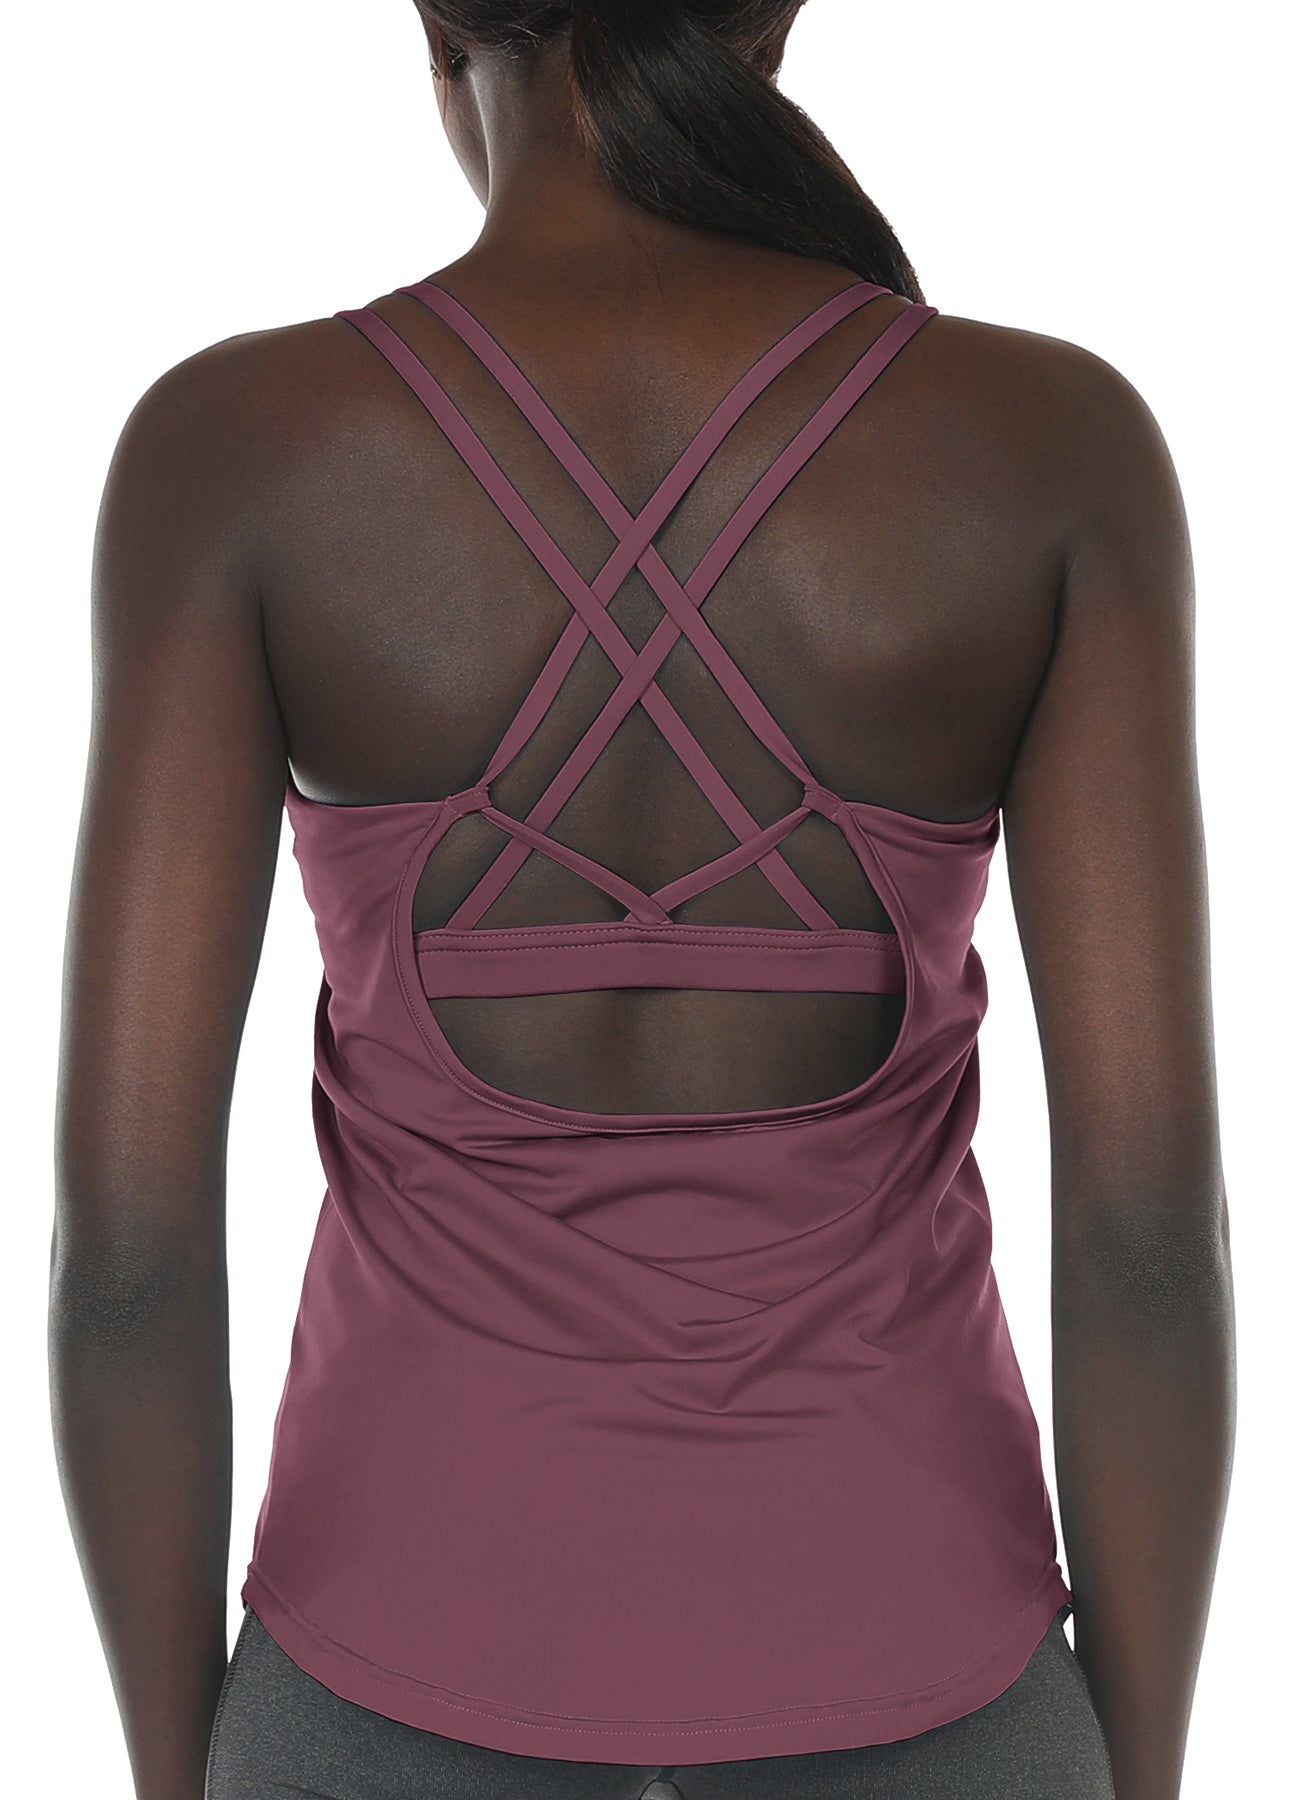 icyzone Workout Tank Tops Built in Bra - Women's Strappy Athletic Yoga Tops,  Exe